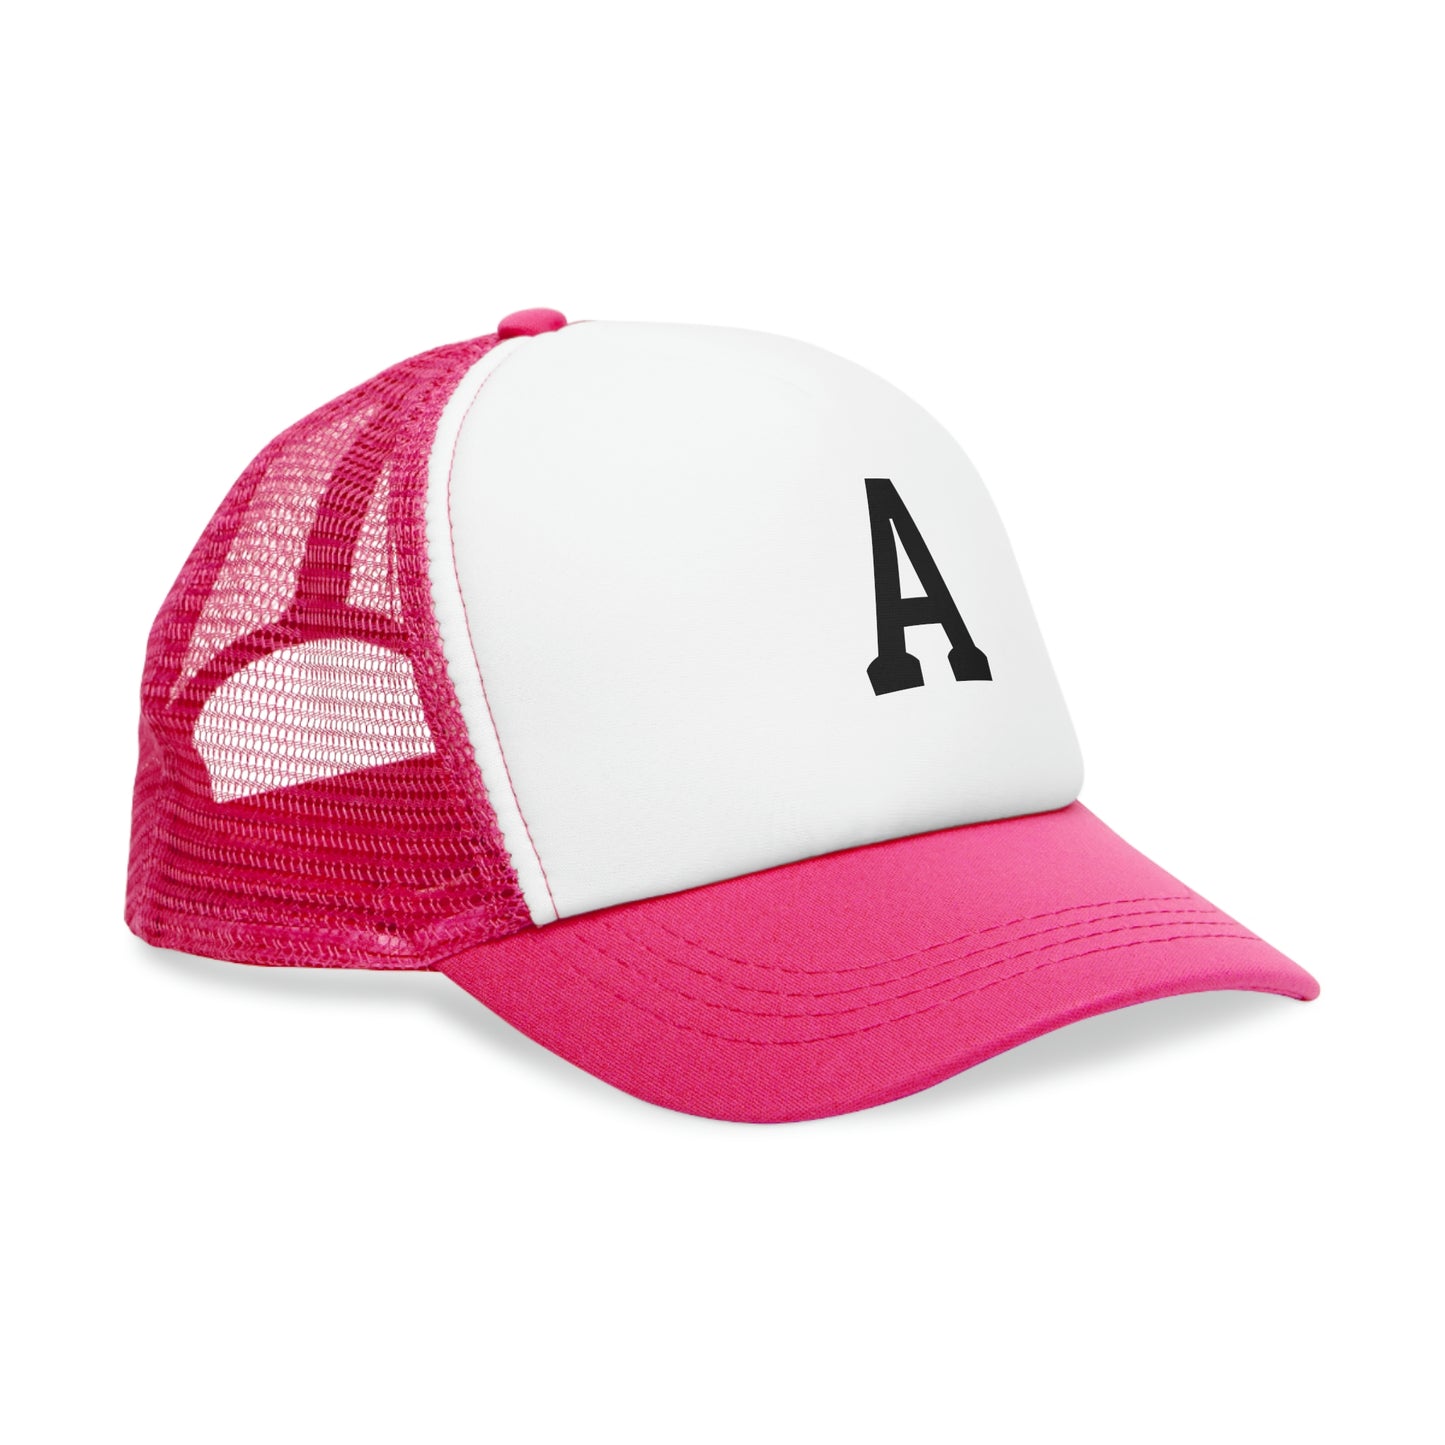 A Letter Printed Kids Hats